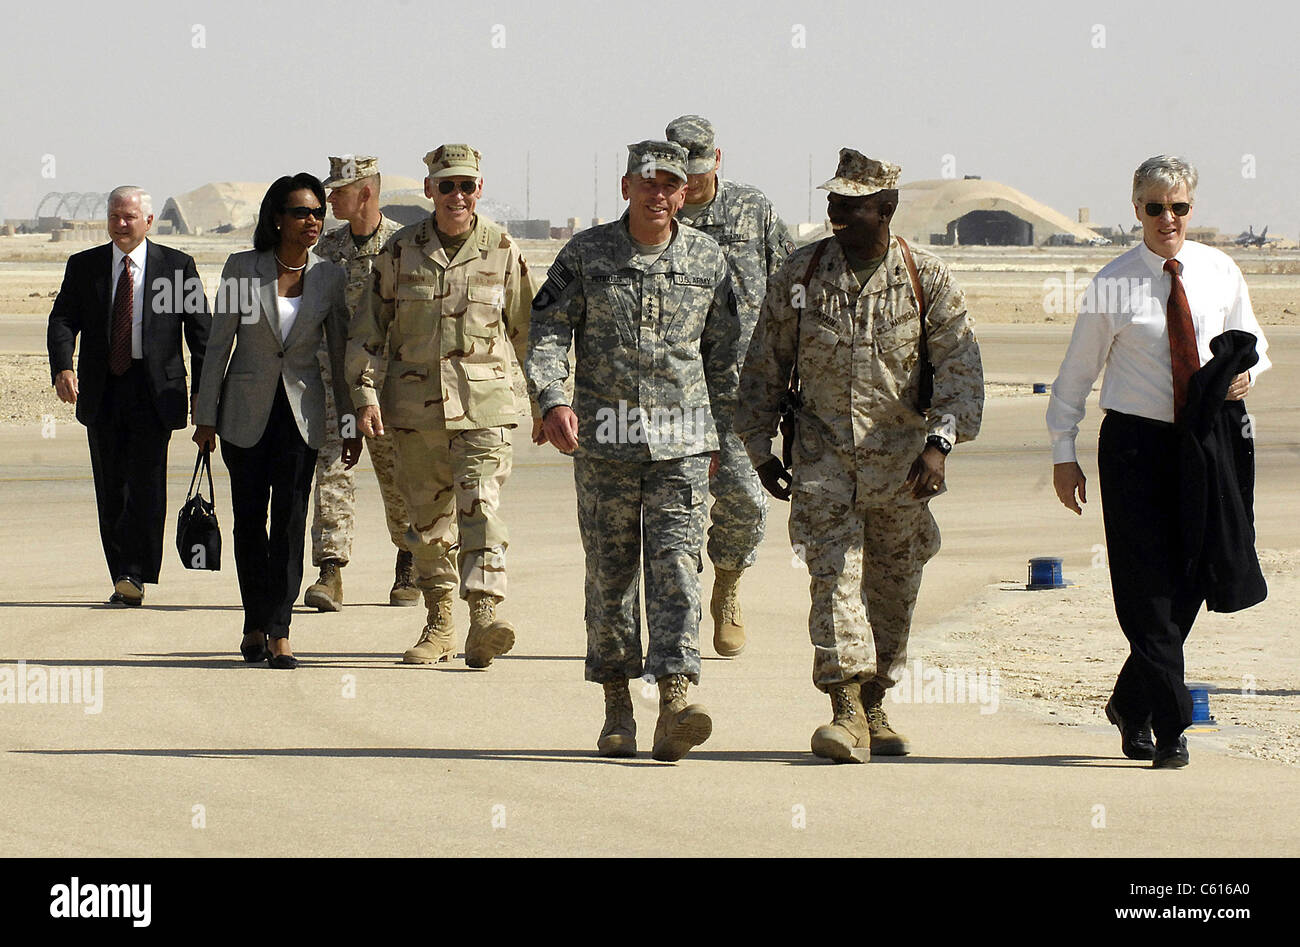 US officials and President Bush arrive at Al Asad Air Base Iraq to meet with members of the Iraqi government and sheiks from Anbar province on Sept. 3 2007. L to R Robert M. Gates Condoleezza Rice Gen. Peter Pace Adm. William J. Fallon Gen. David Petreaus Lt. Gen. Ray Odierno Maj. Gen. Walter E. Gaskin and U.S. Ambassador Ryan Crocker. Stock Photo